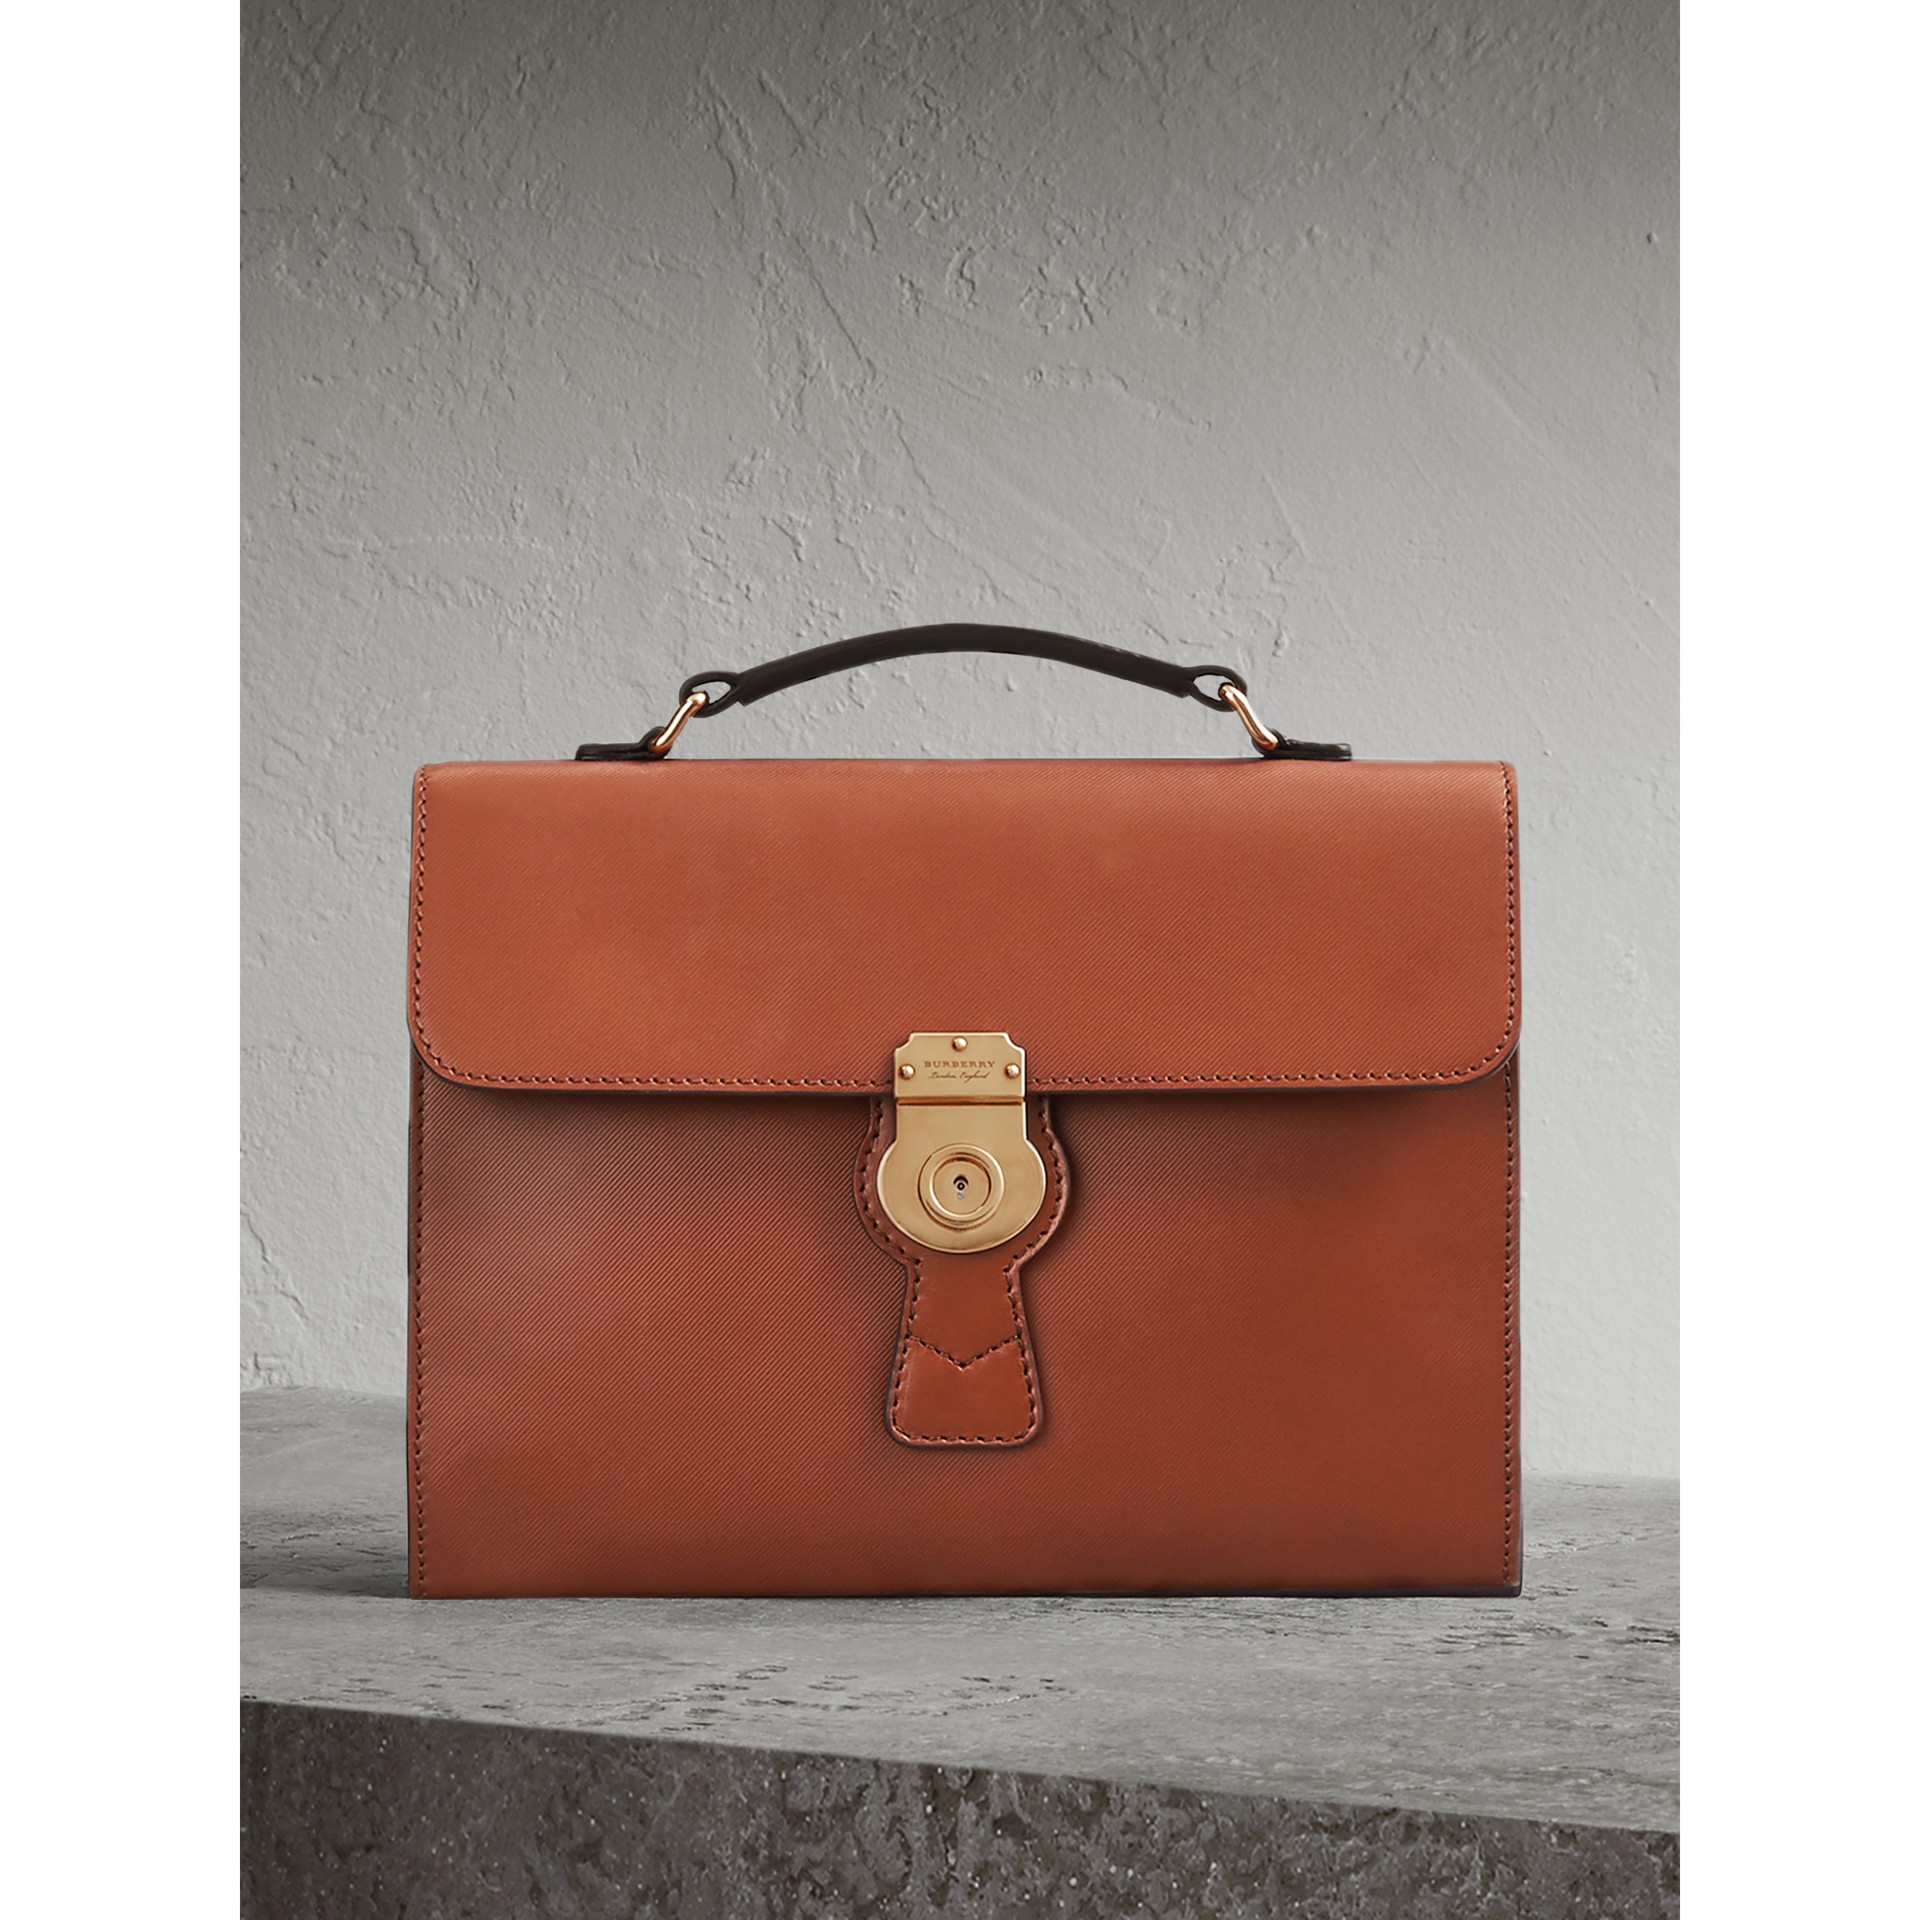 Burberry The Large Dk88 Document Case In Tan